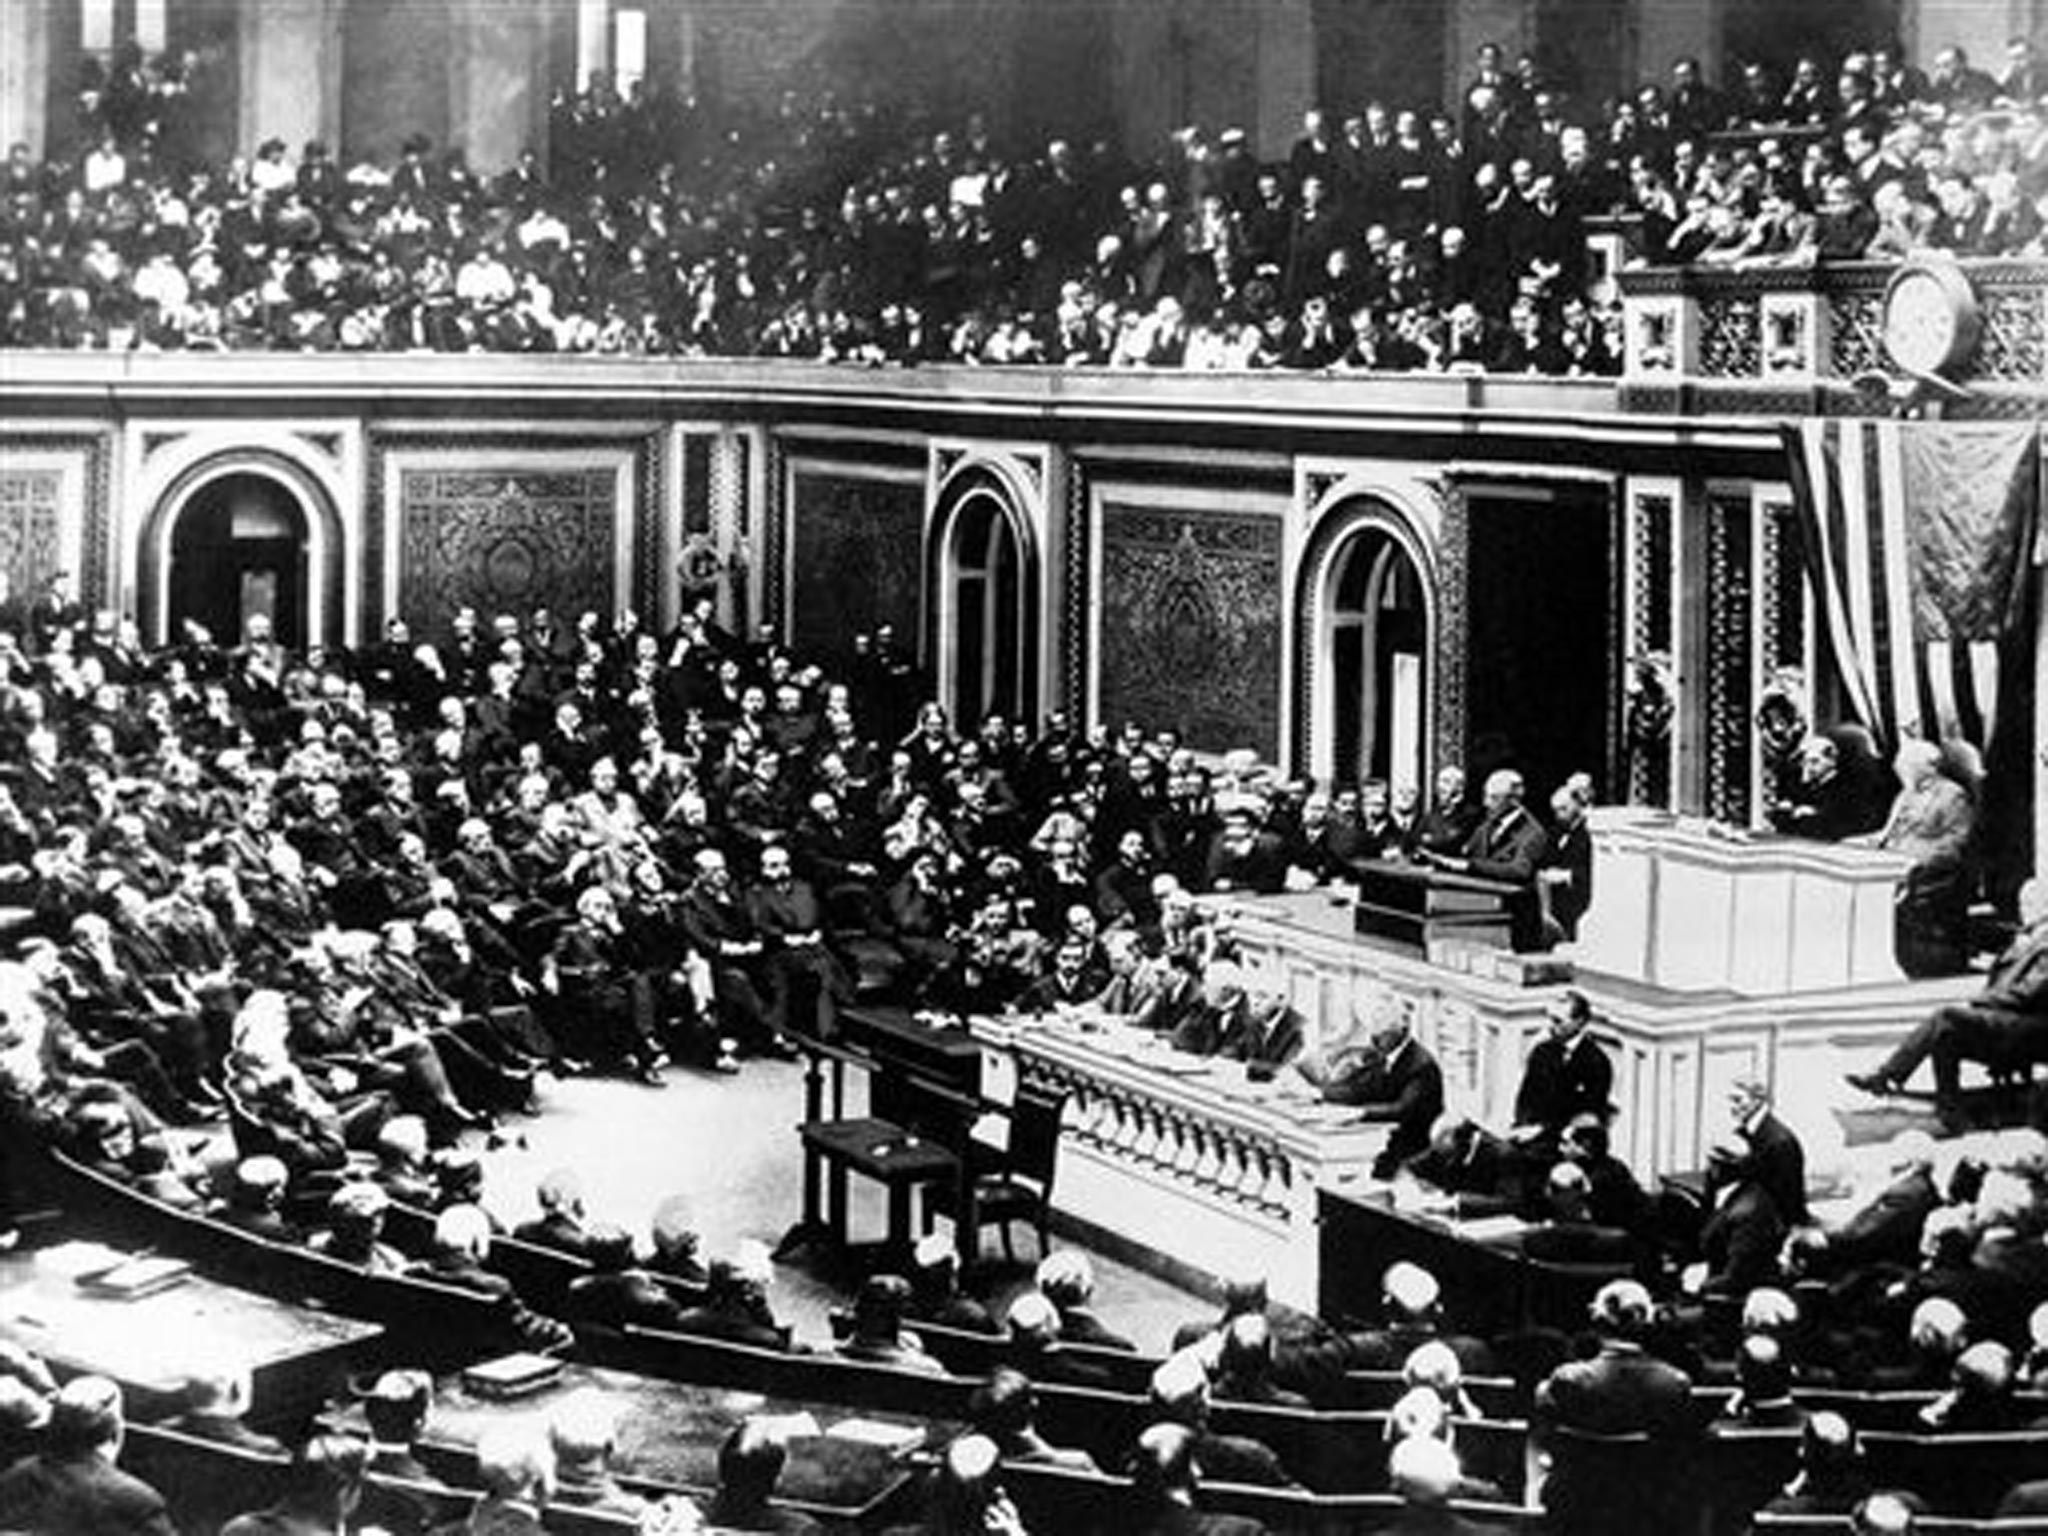 The moment that ushered in the American century: President Woodrow Wilson asks
Congress to ratify a declaration of war against Imperial Germany